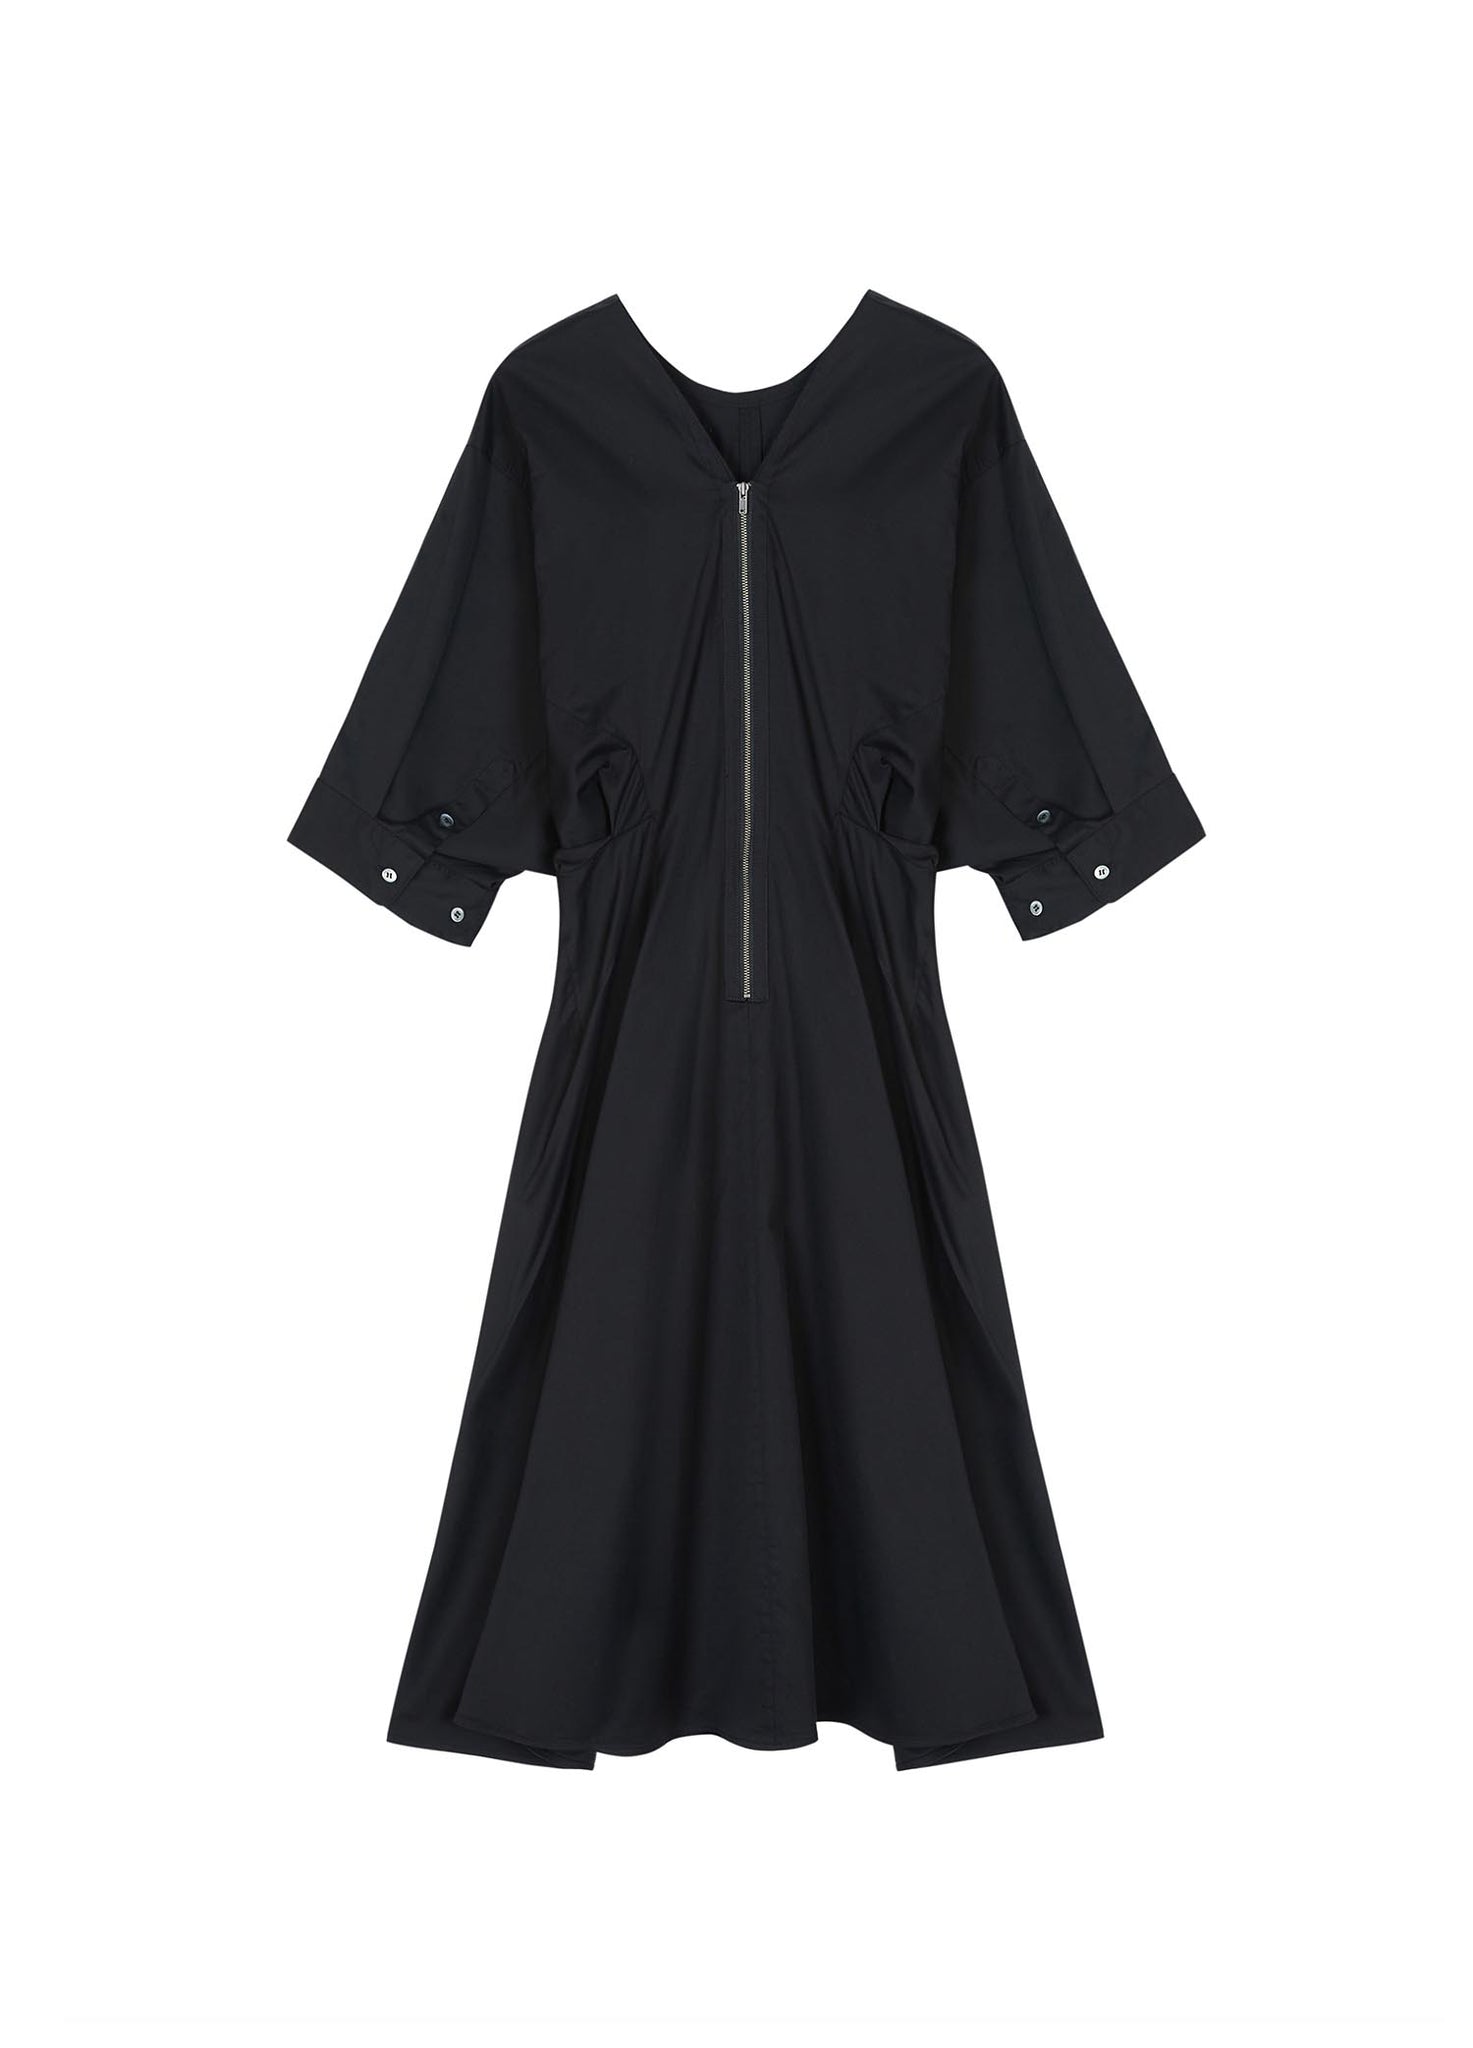 Dresses / JNBY Casual Mid-Sleeve Dress (100% Cotton)